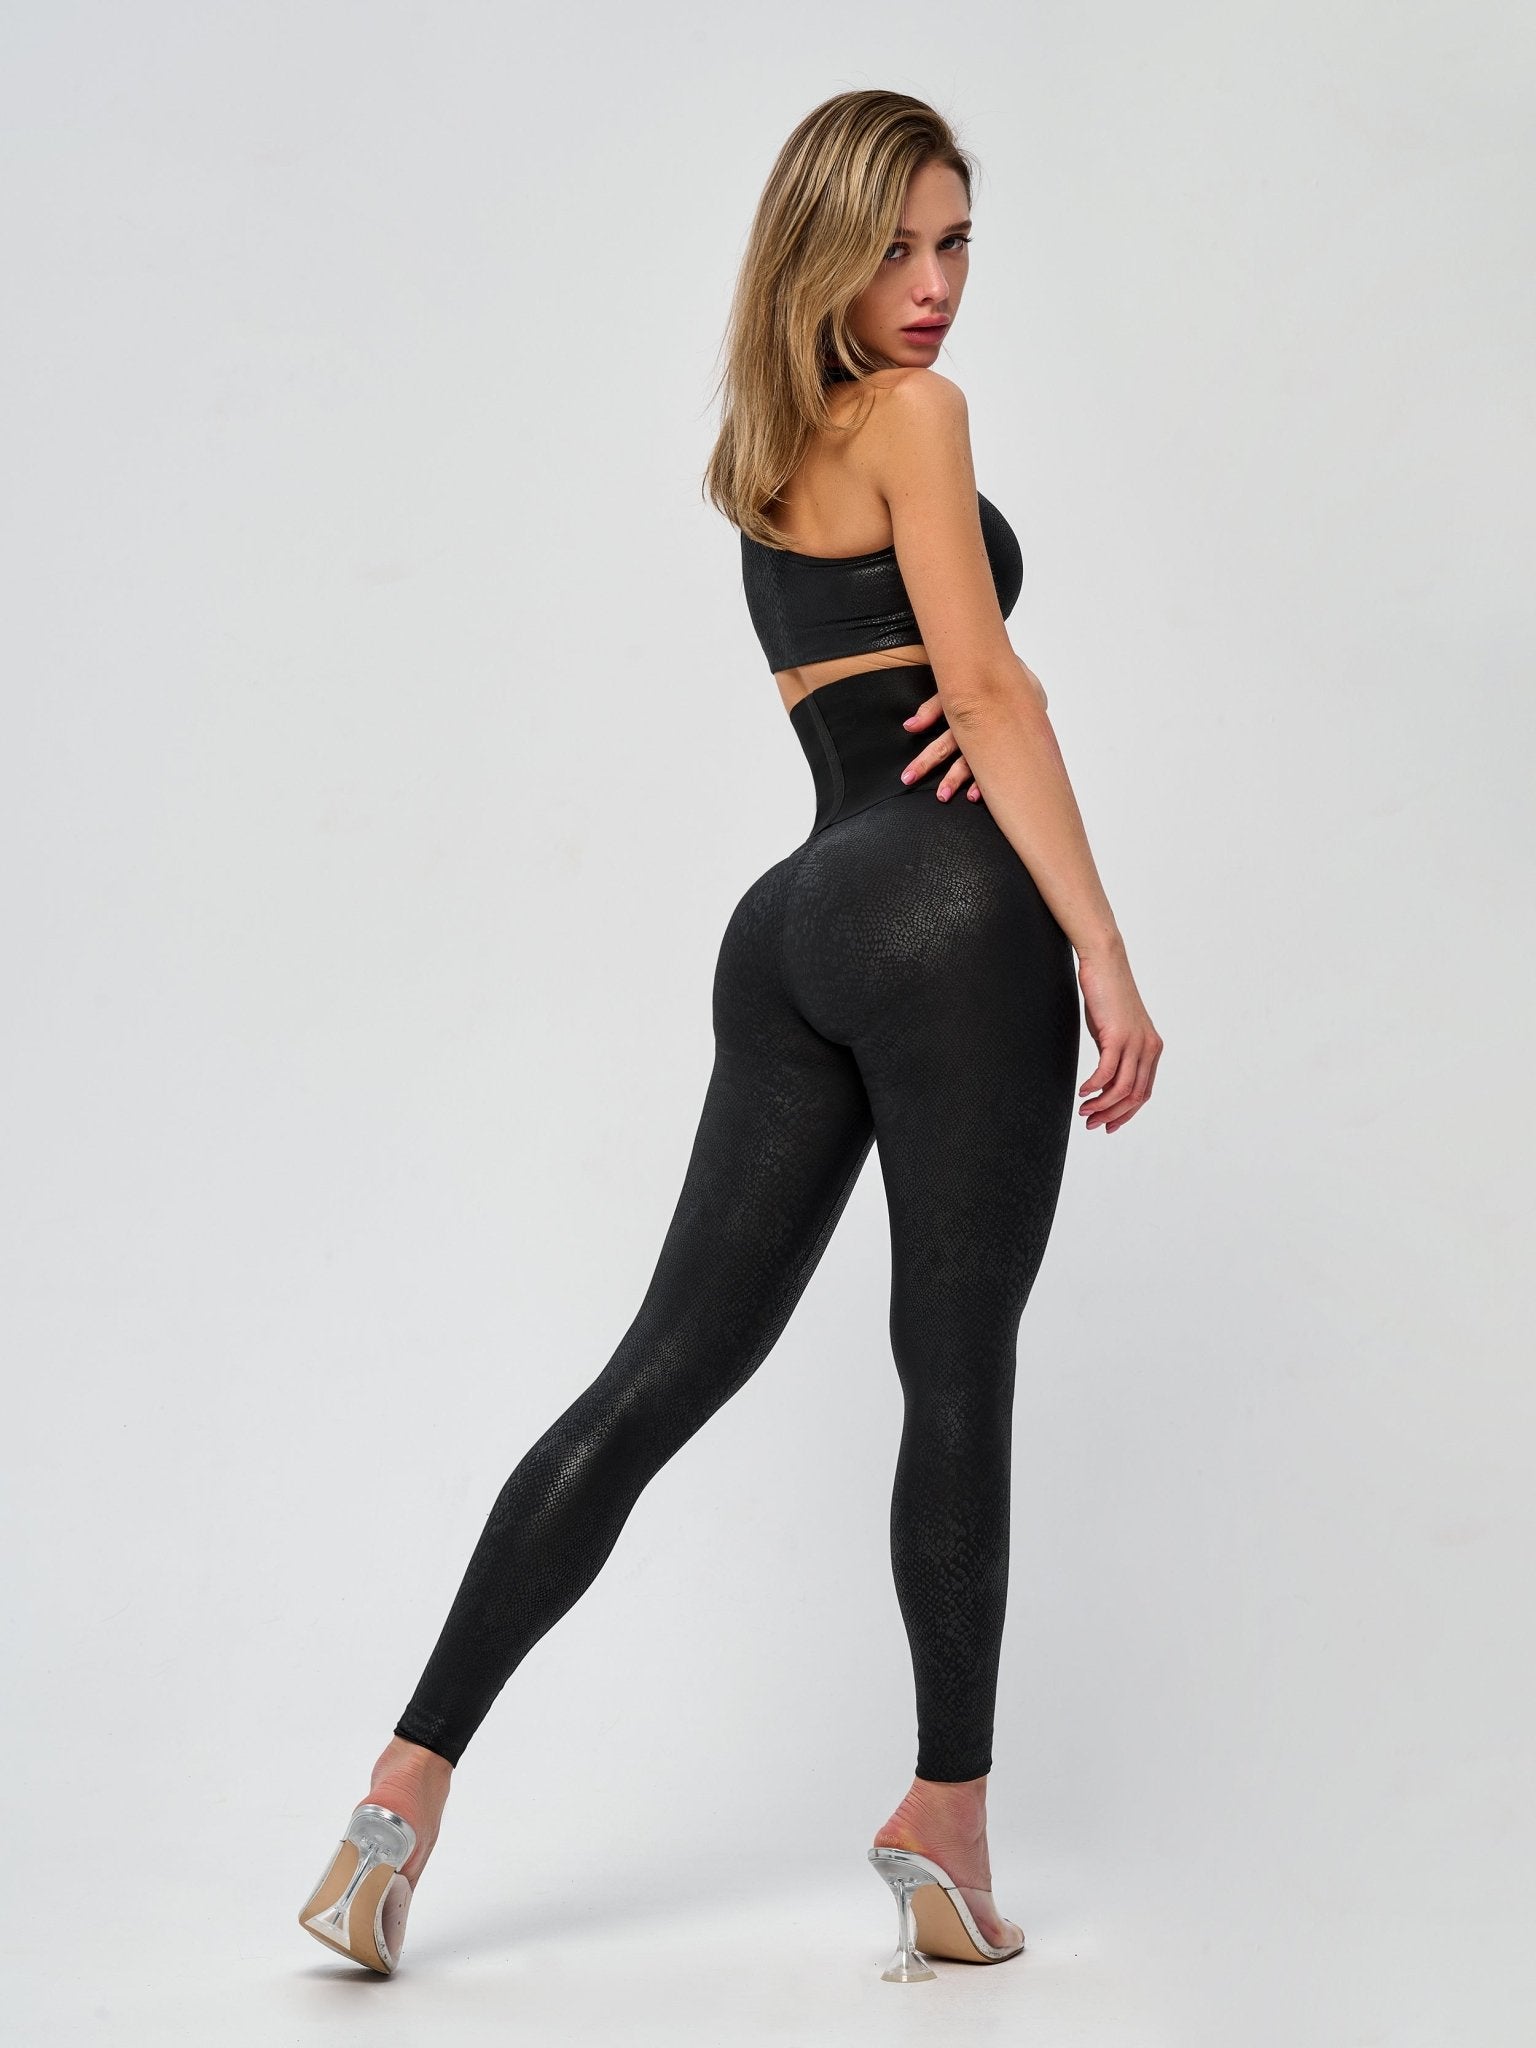 Shiny Leggings and Activewear from Bona Fide : r/TheSecondSkinSpandex